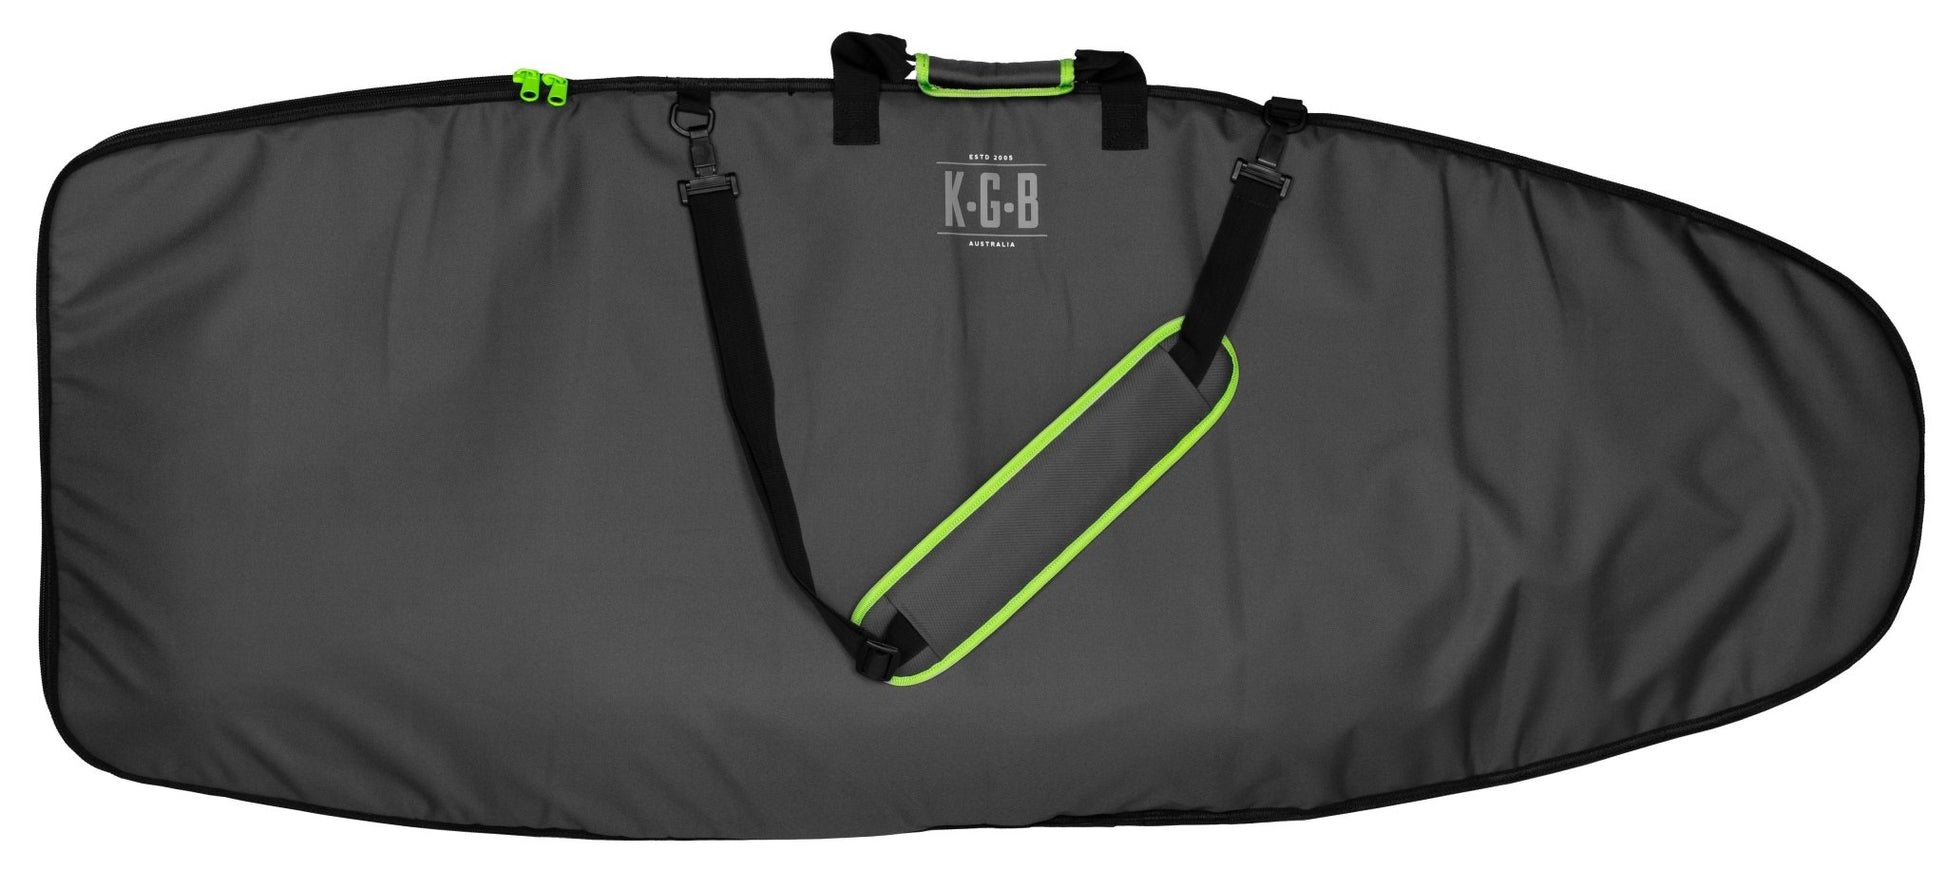 2023 KGB Wakesurf Bag -KGB226500-Charcoal / Lime-Up to 5 0